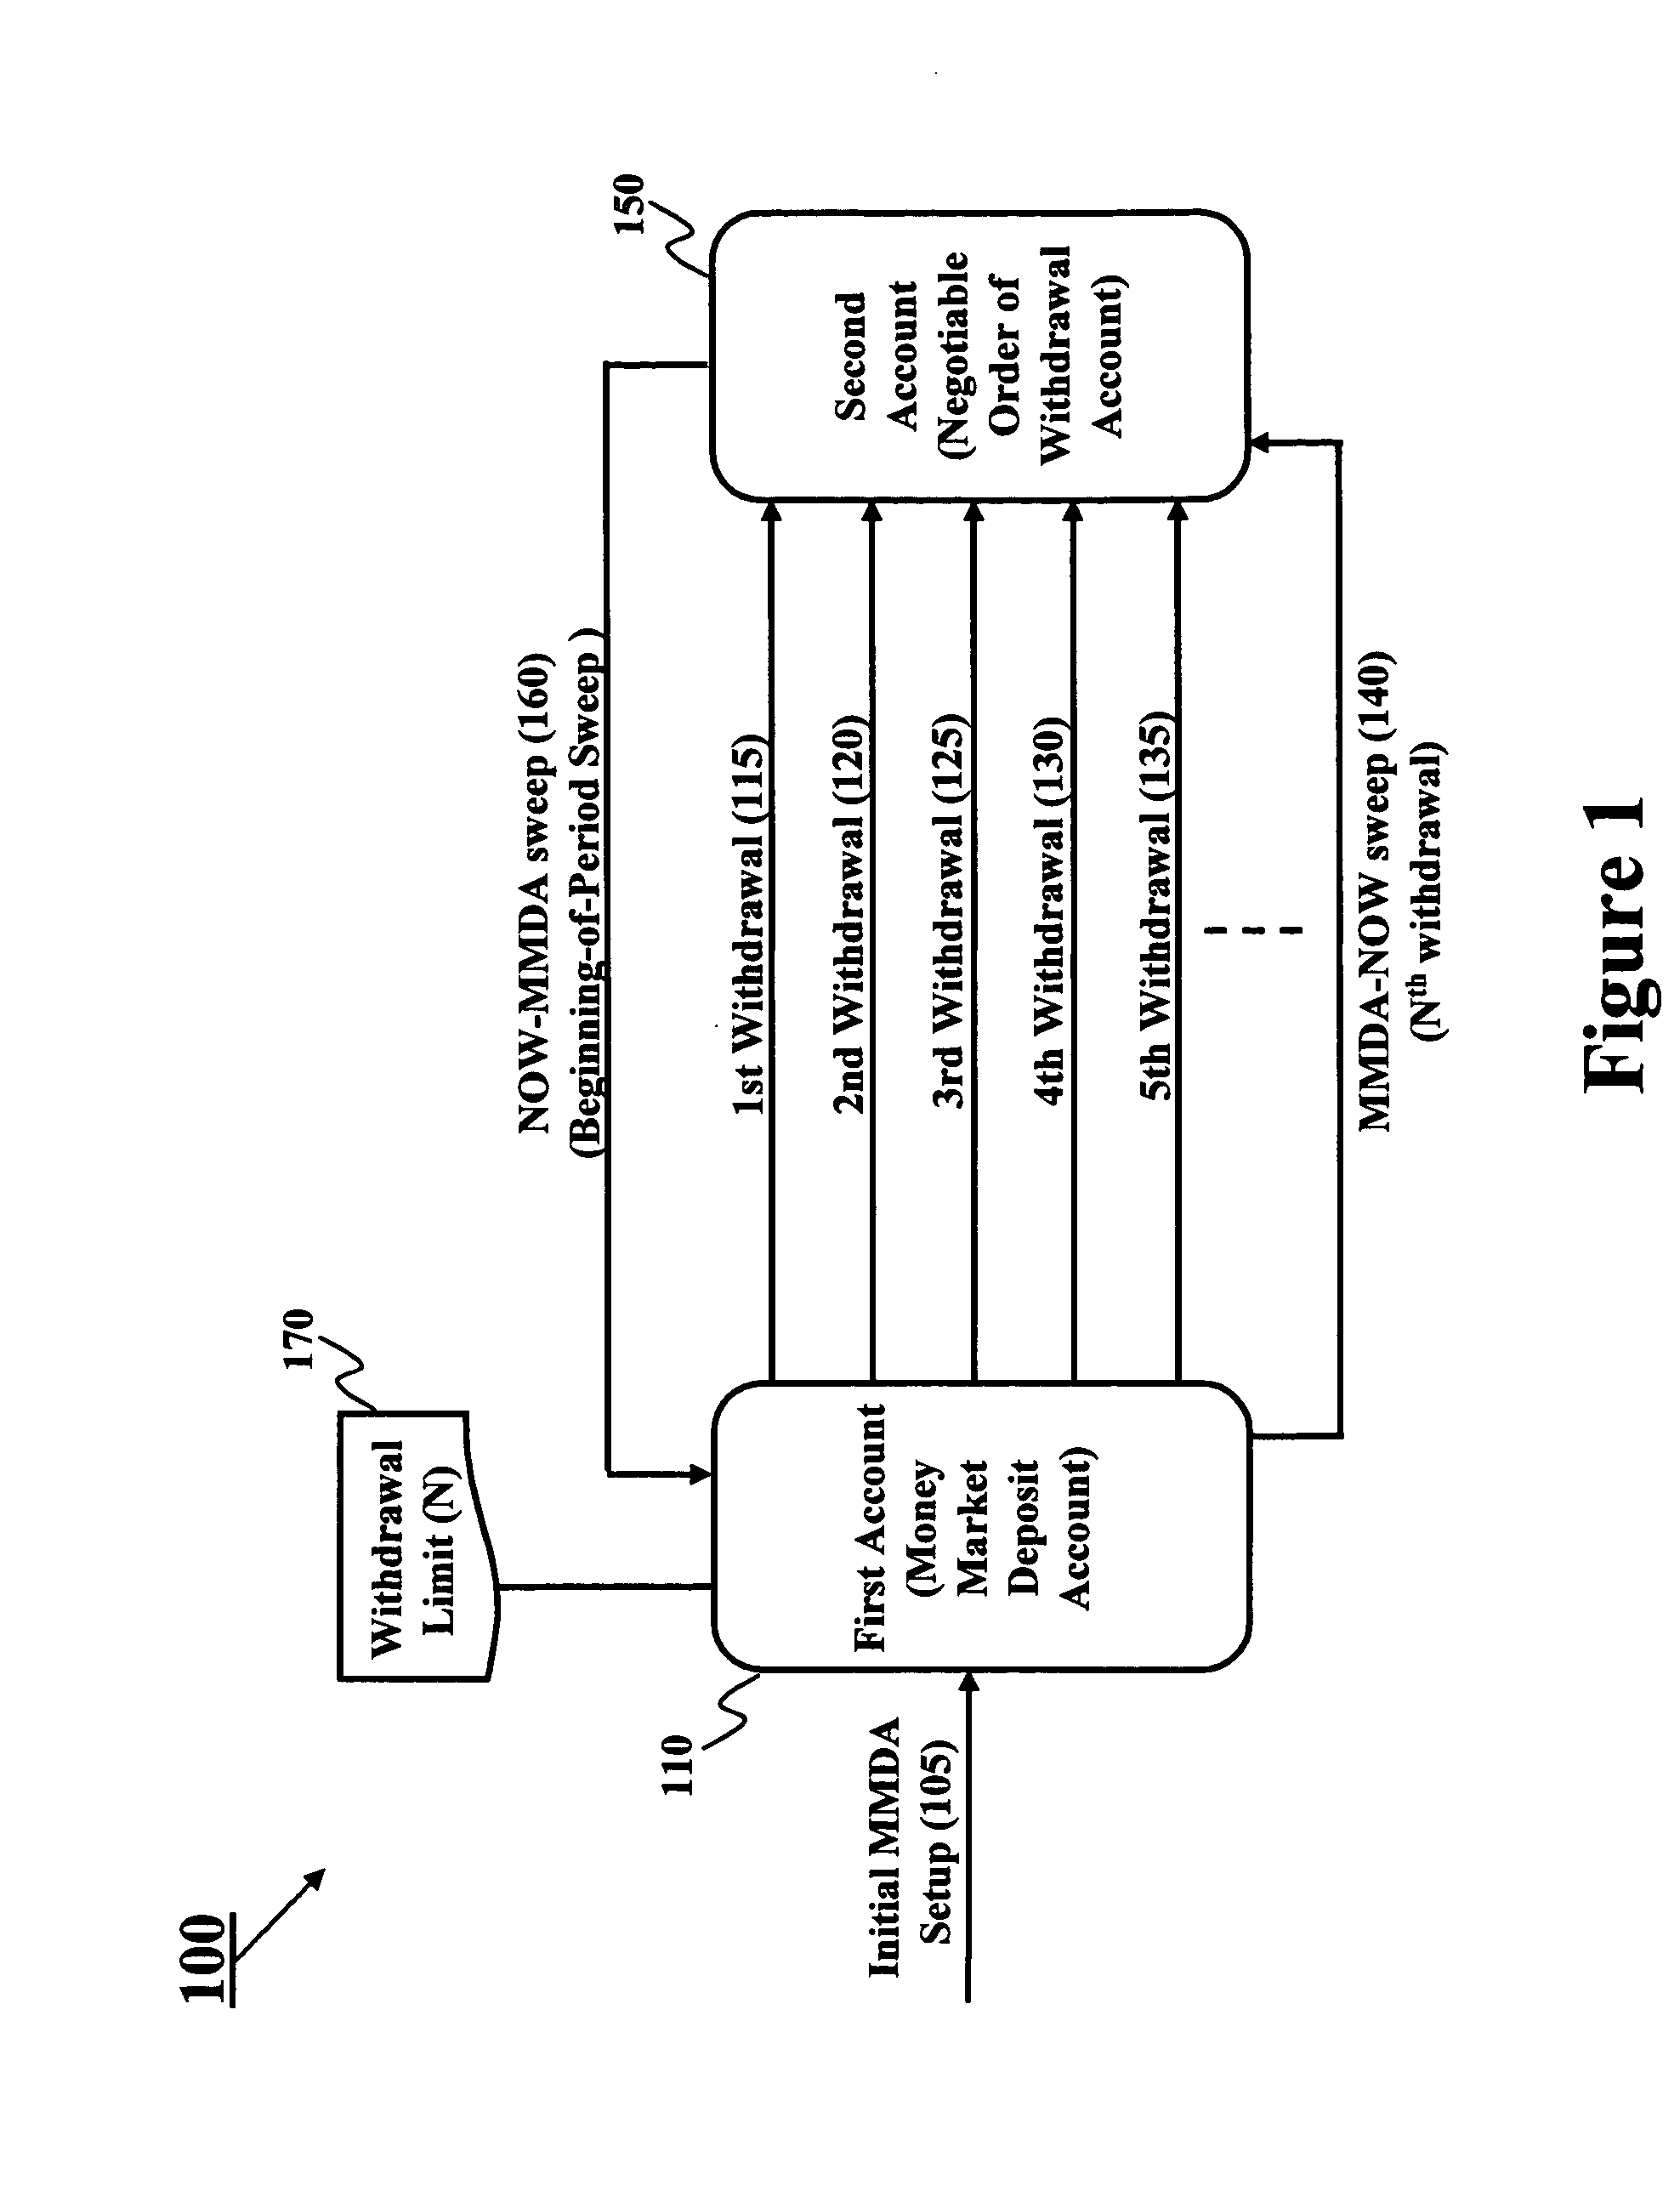 Method and system for funds management